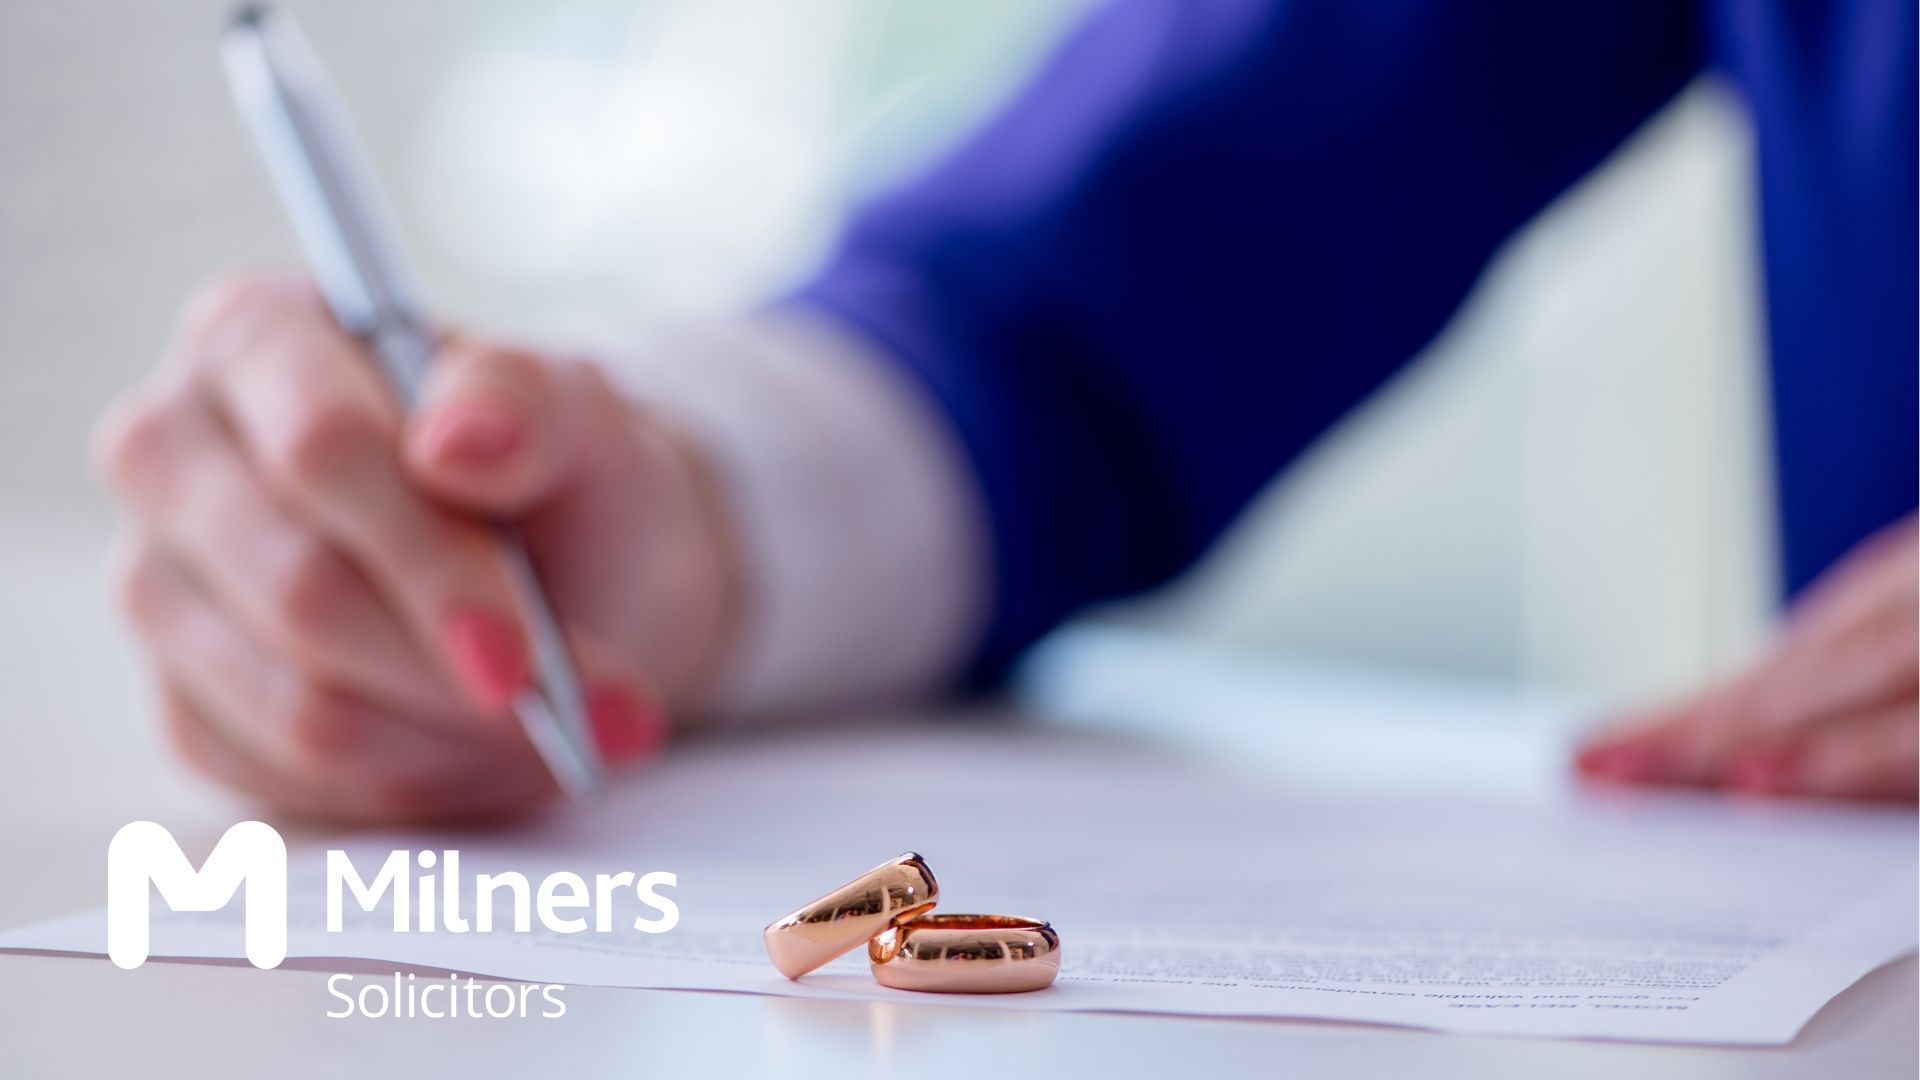 Prenuptial agreements aren't legally binding, so you need to make sure yours is fair and realistic. Find out what this means in our handy explainer article.
